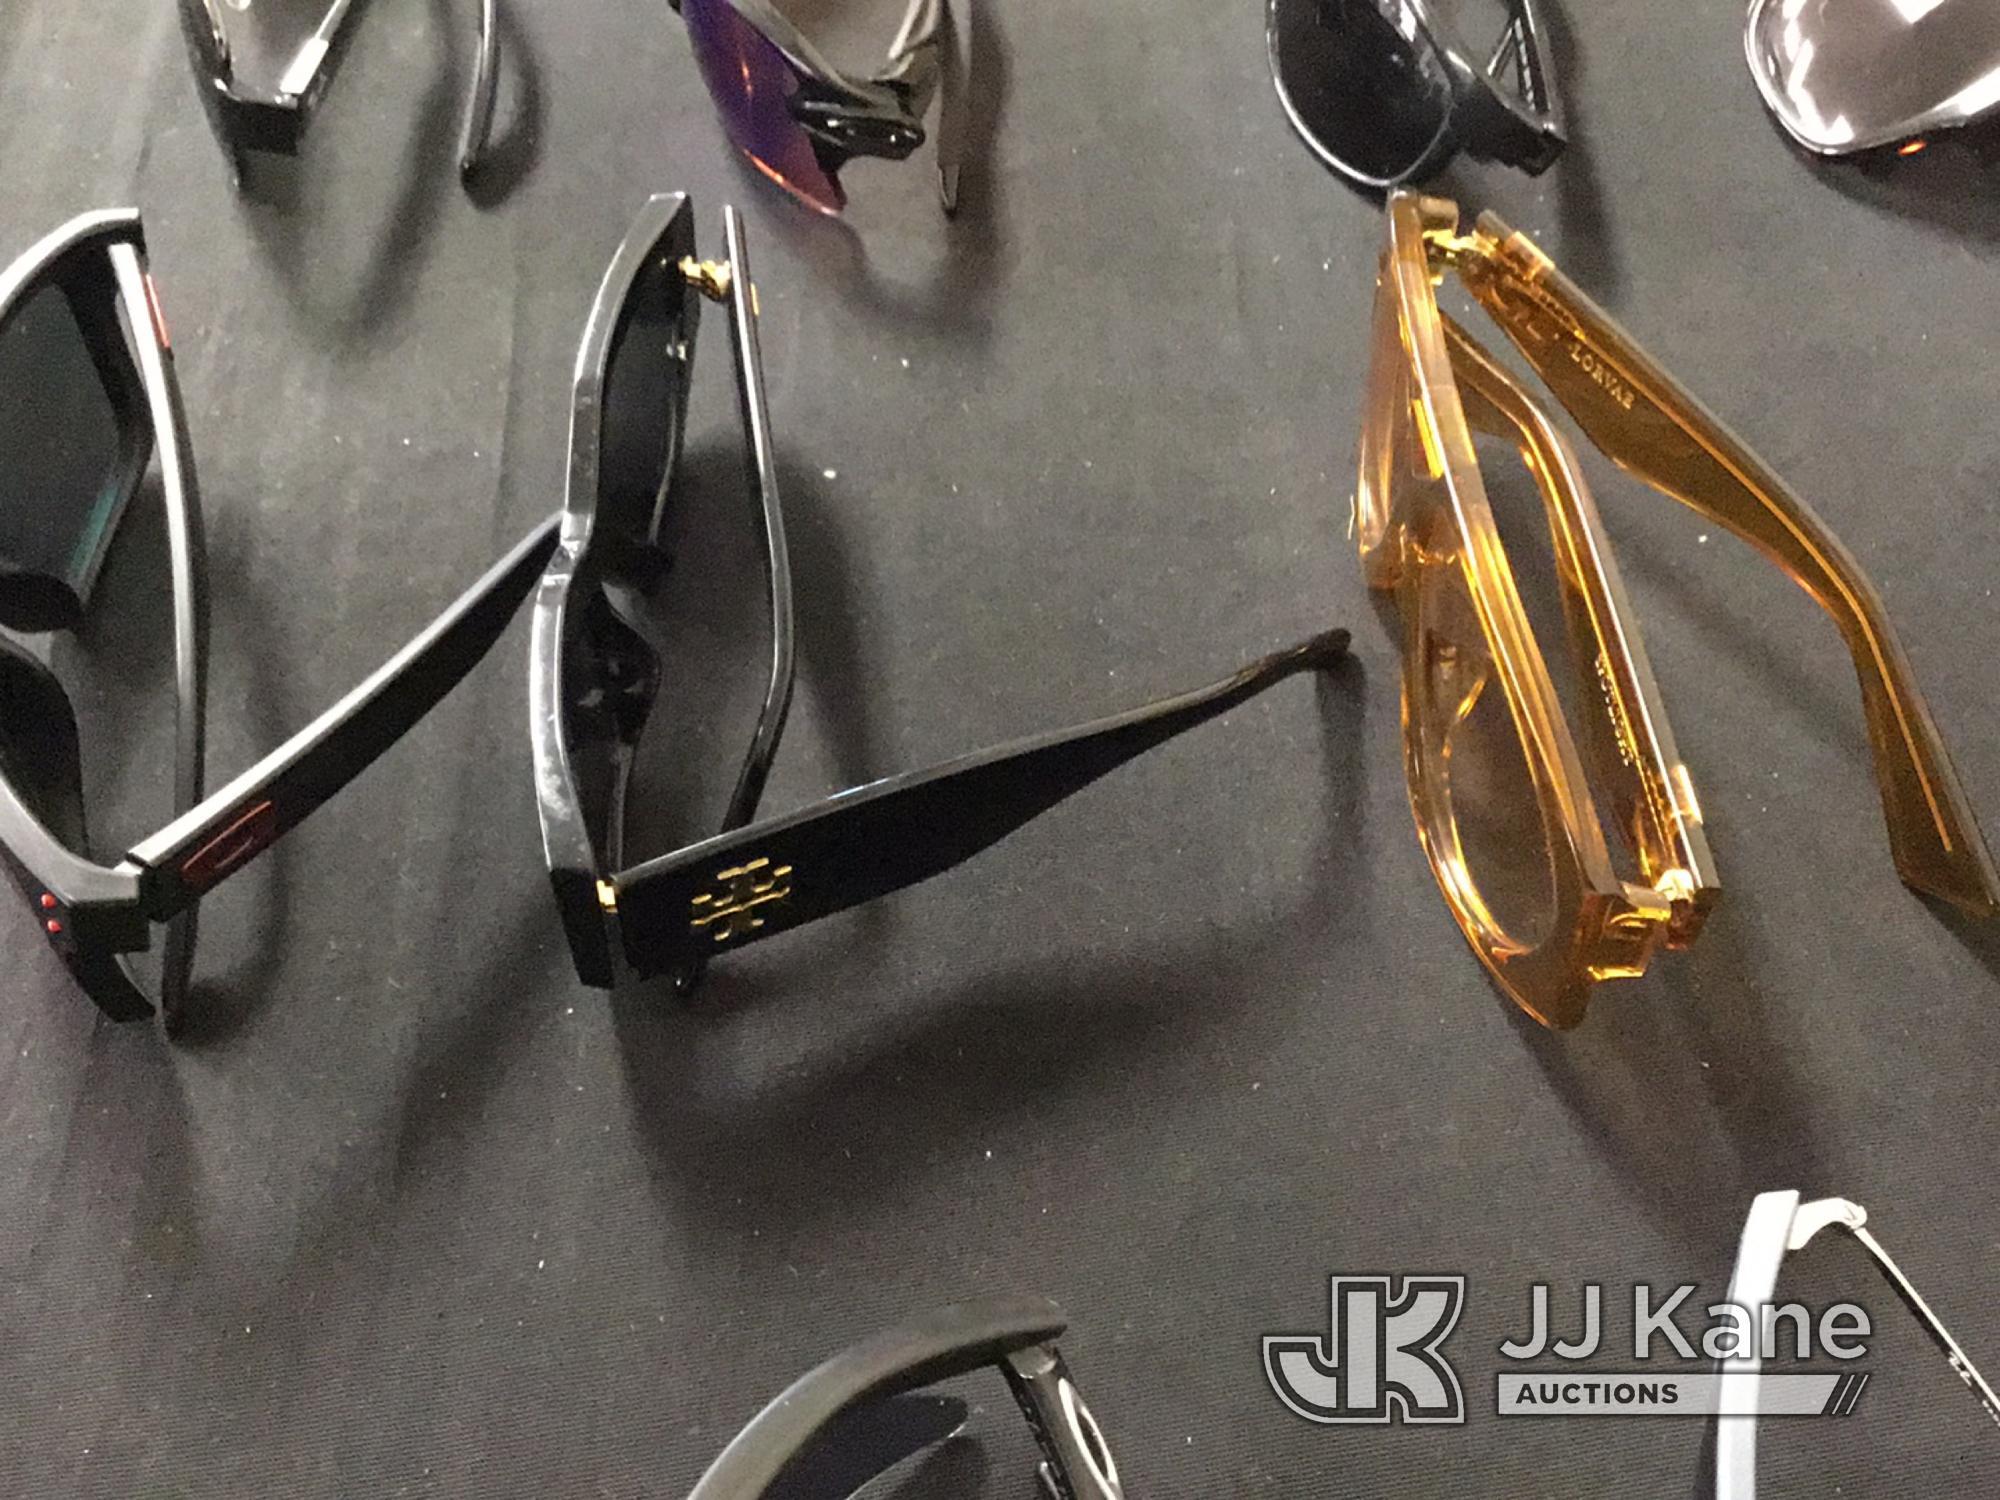 (Jurupa Valley, CA) Sunglasses | cases | authenticity unknown (Used ) NOTE: This unit is being sold